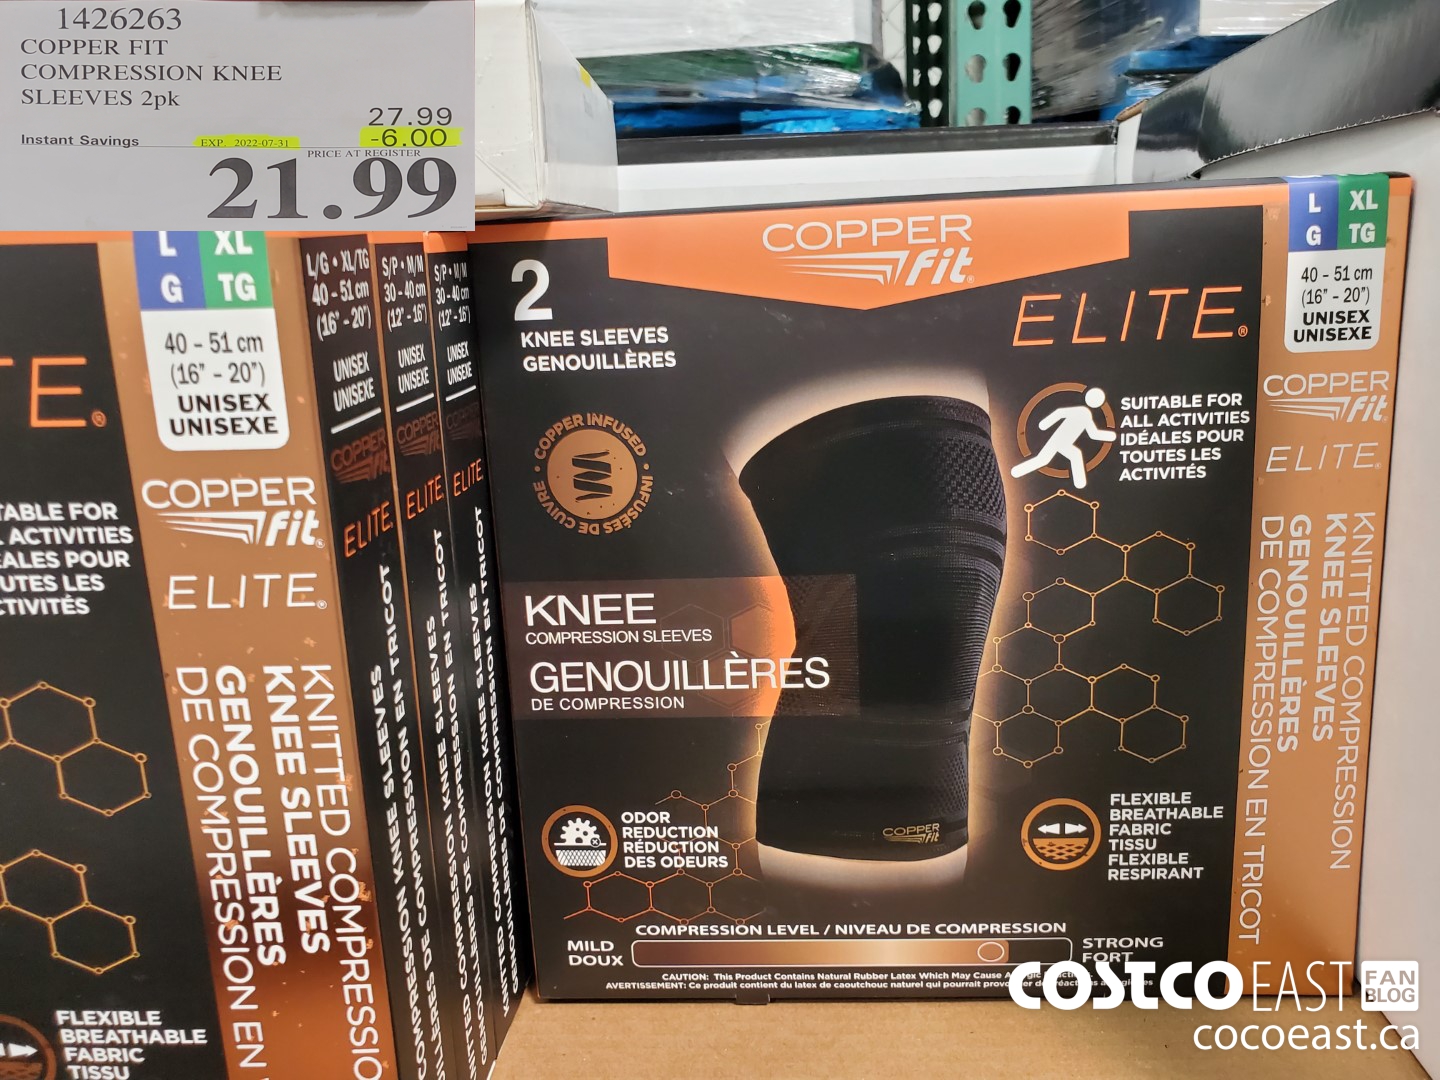 COSTCO DEALS on Instagram: 🚨SPECIAL PRICE ALERT🚨 🙌Elite @CopperFit Air  Back support is now on special pricing at @Costco for $9.97! 🙋🏻‍♀️If you  have back pain or just need some lumbar support